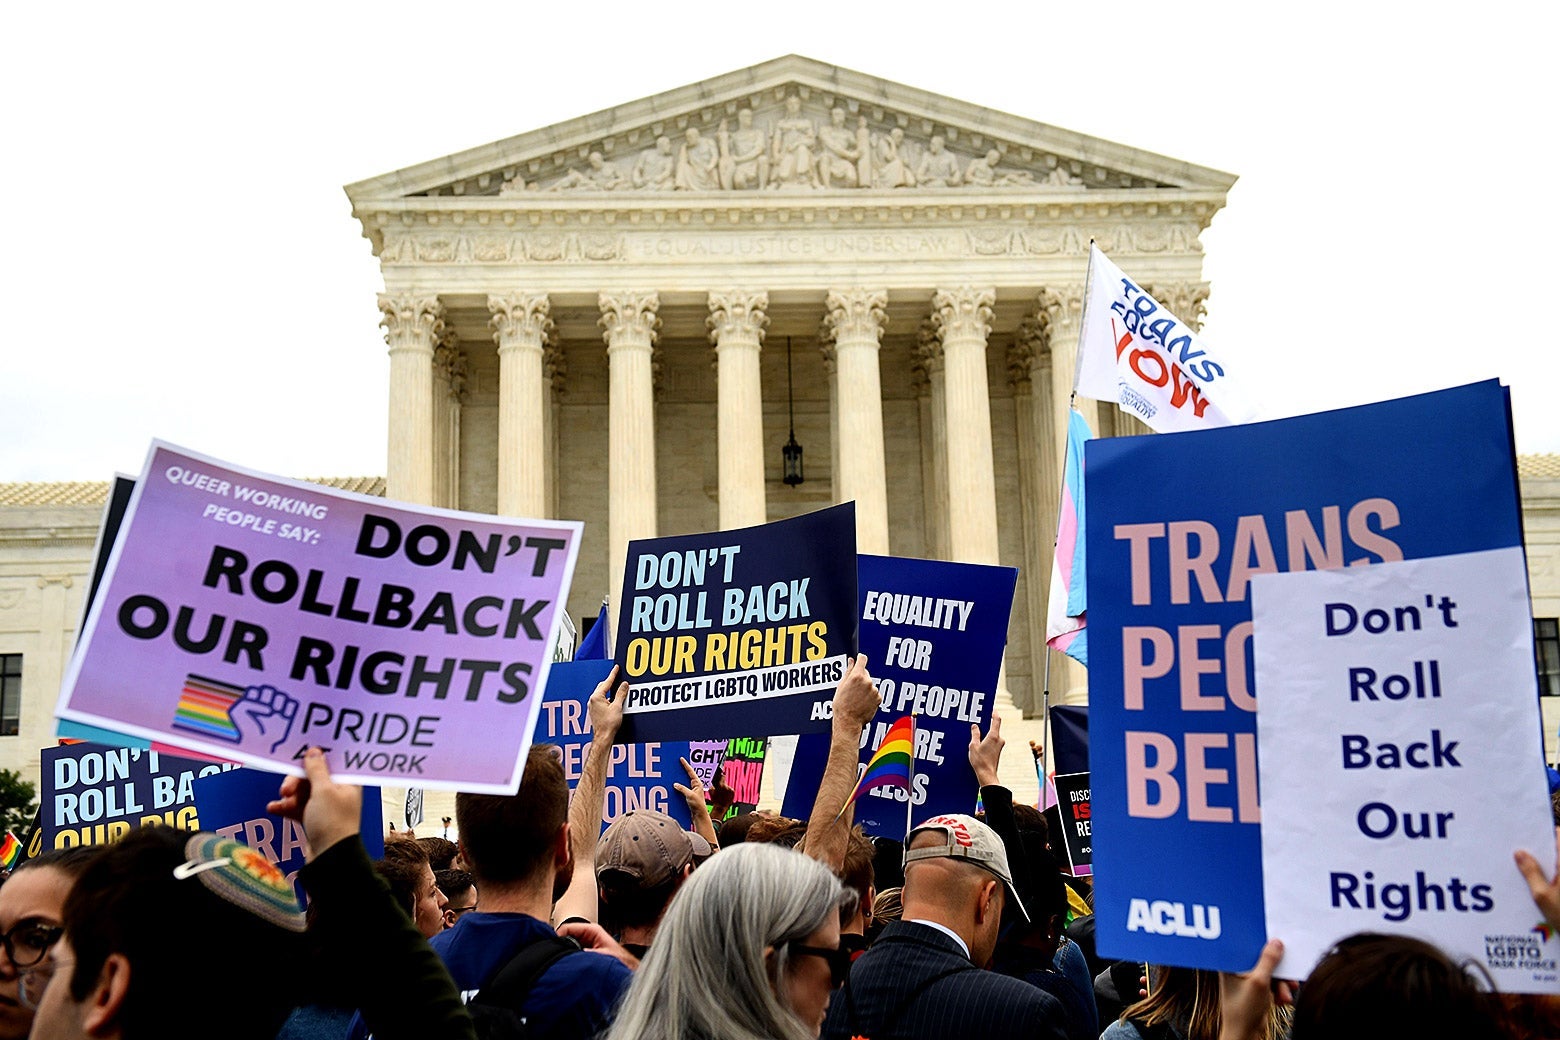 LGBTQ rights activists protest outside the Supreme Court, holding signs that say "Don't Roll Back Our Rights."